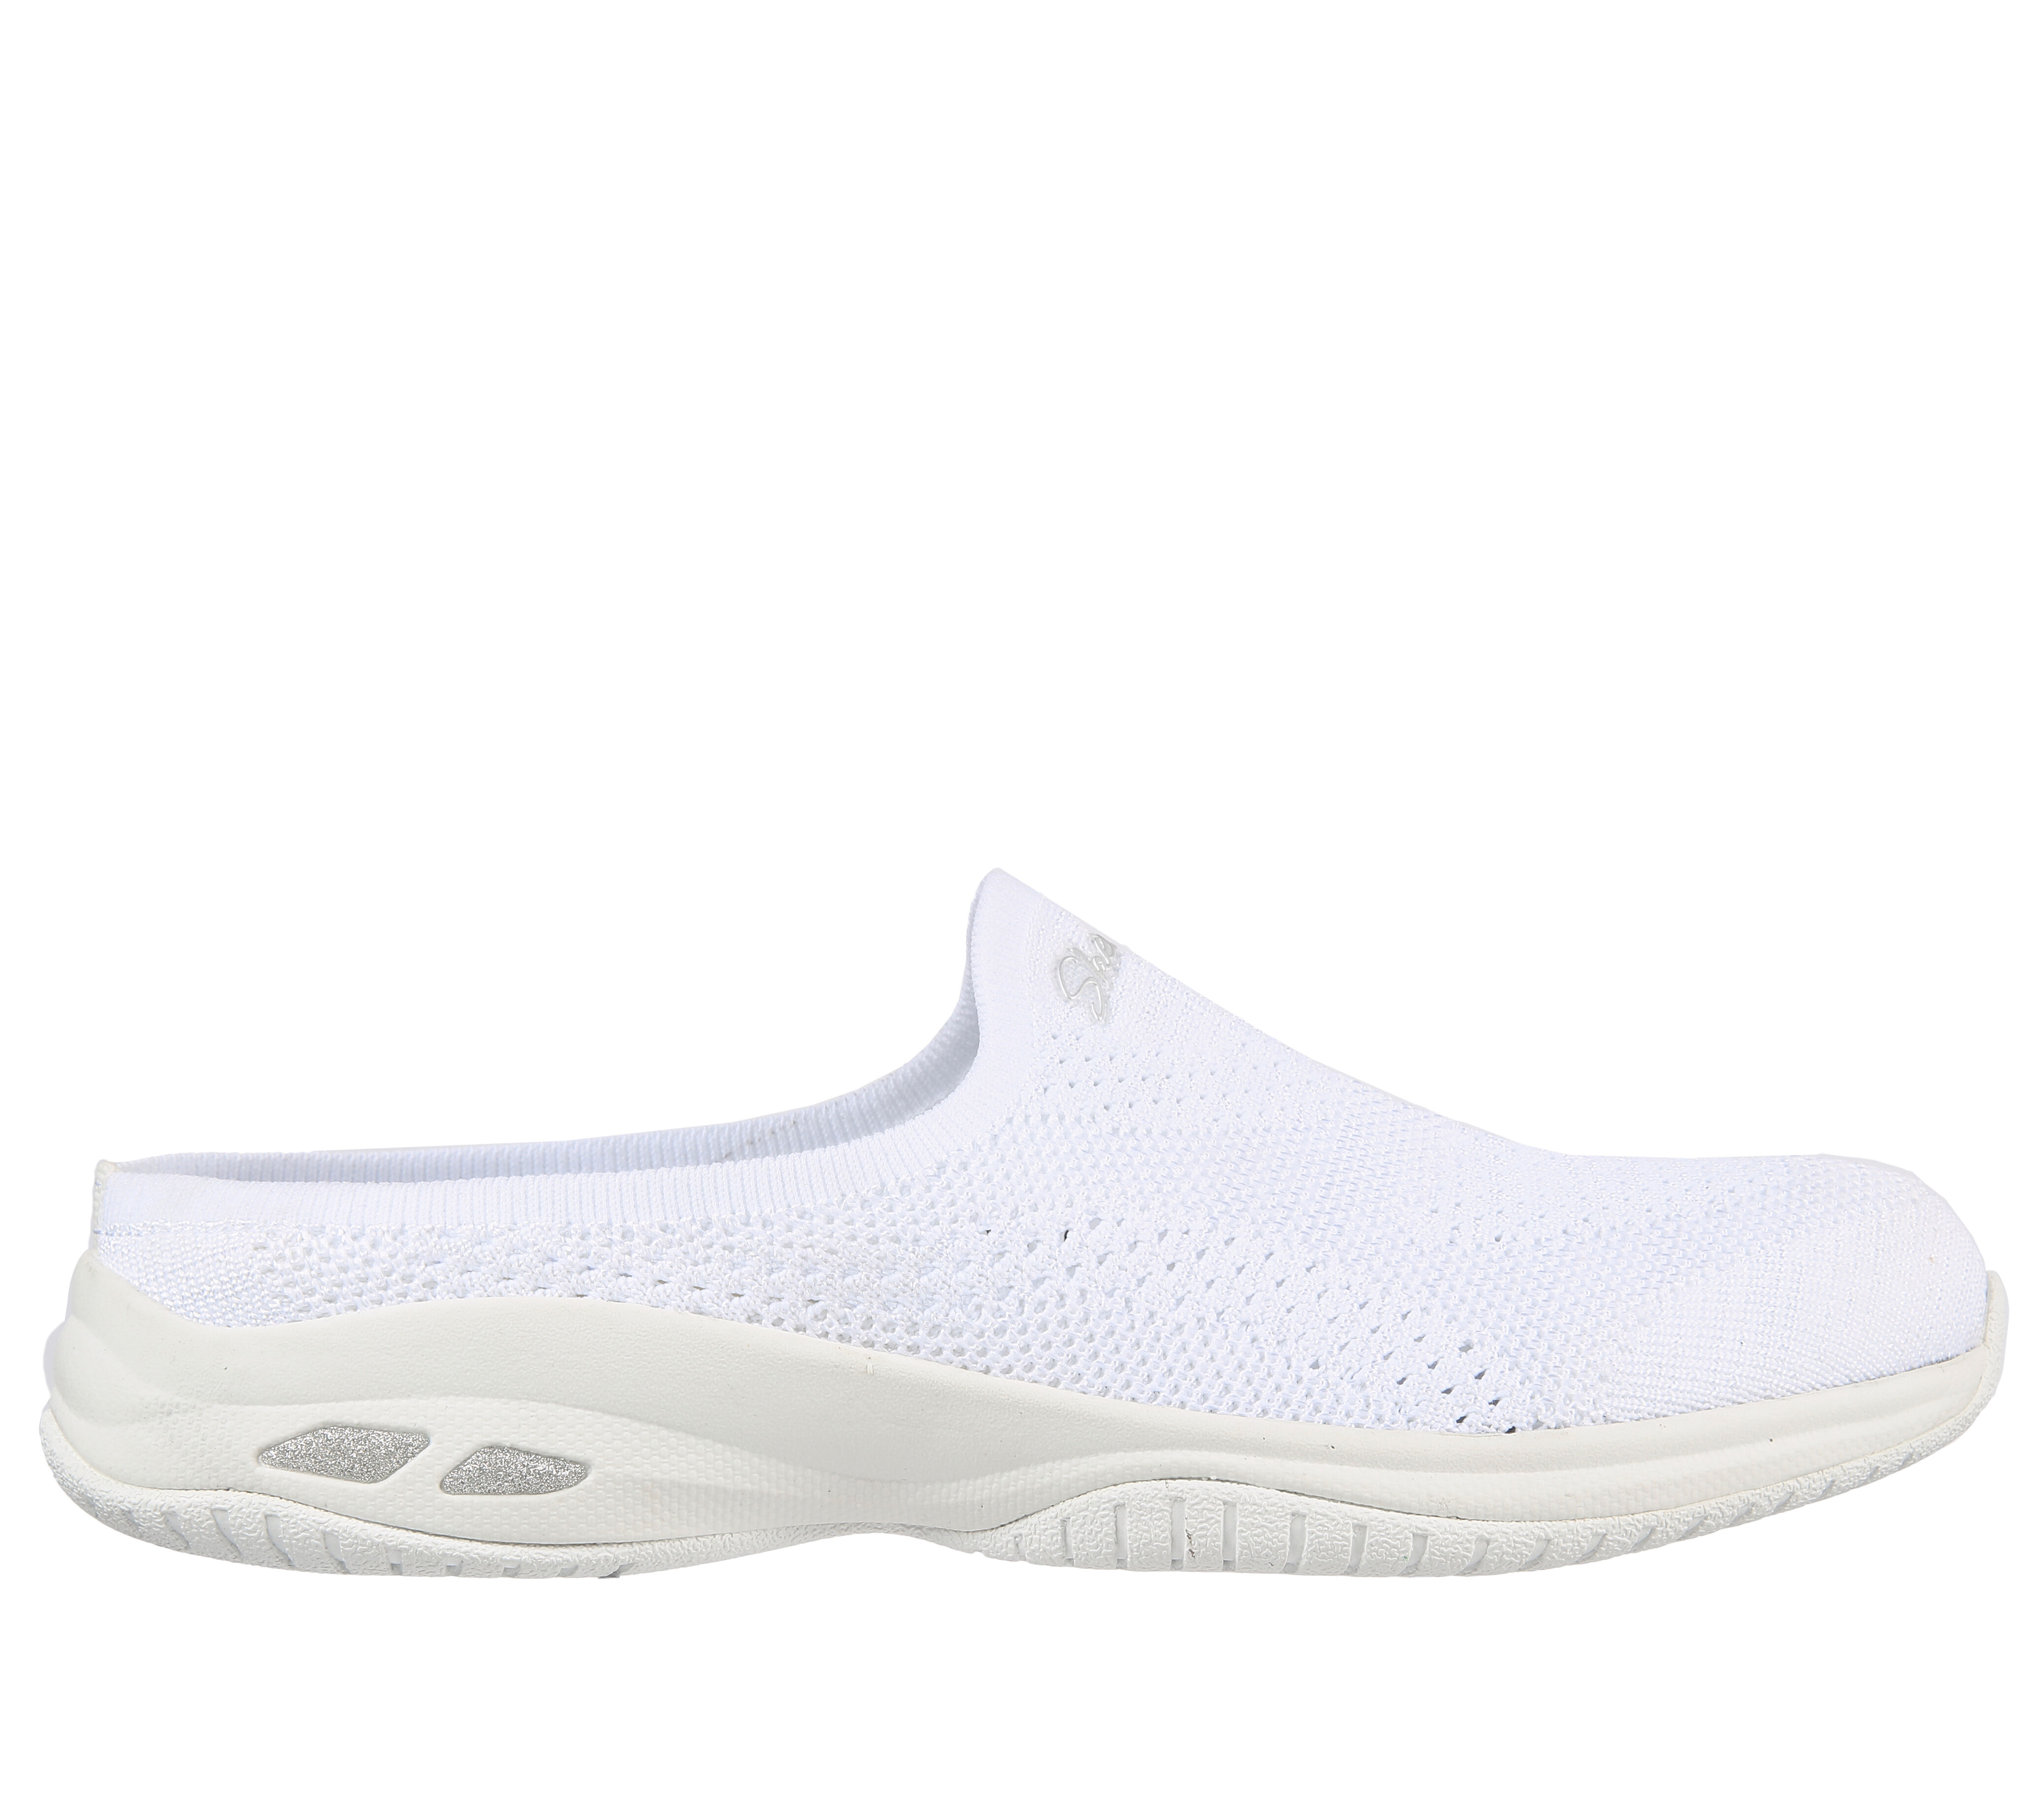 skechers relaxed fit white